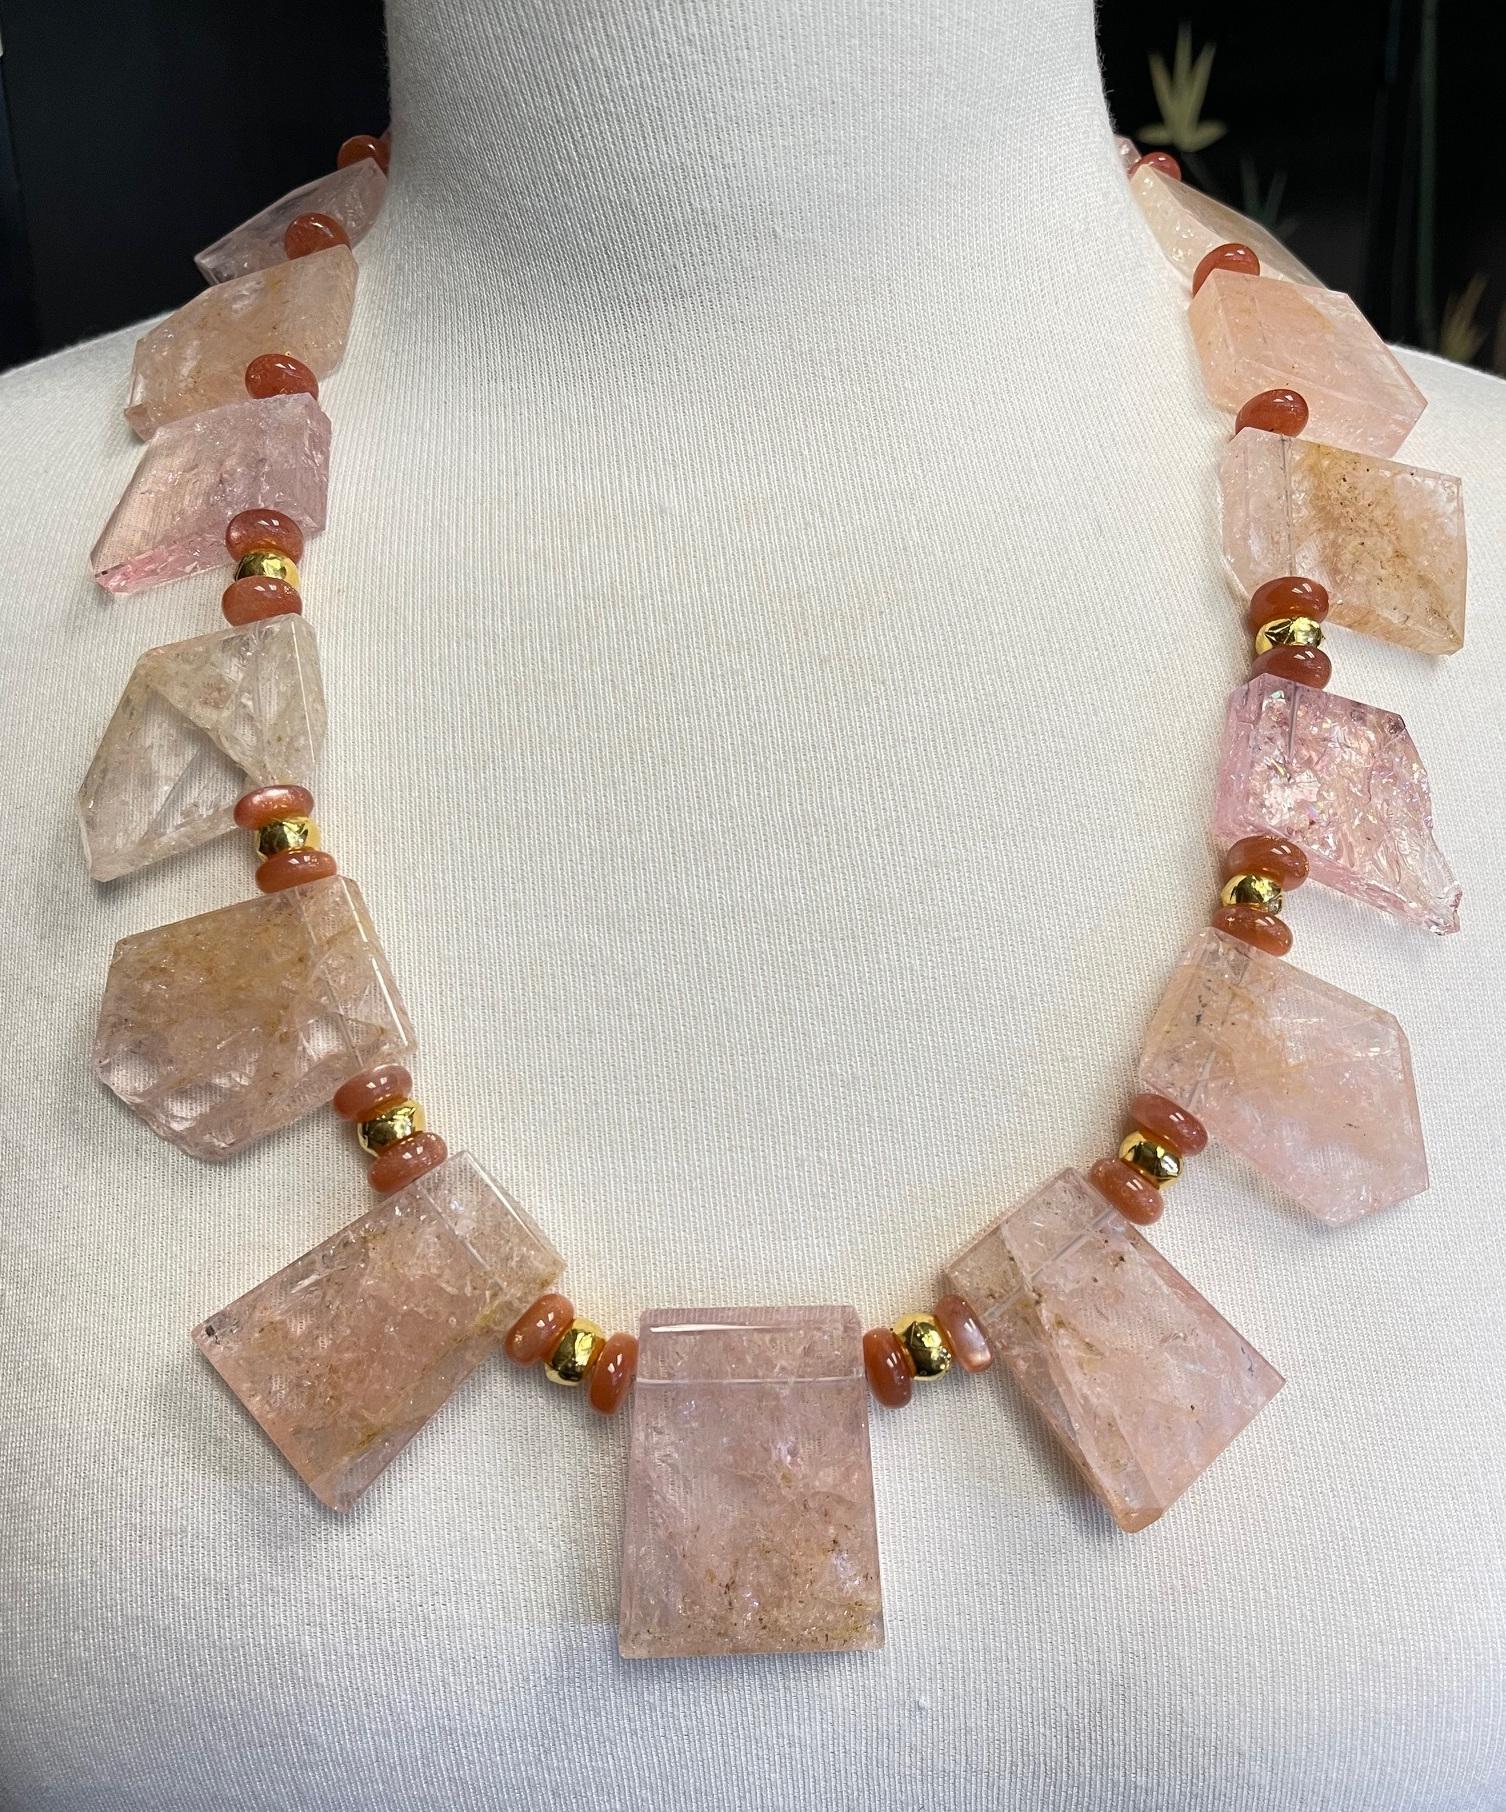 This stunning statement necklace features gorgeous natural morganite tile beads in a lovely array of pink champagne colors! The gemstone tiles are accentuated by mesmerizing natural characteristics that add beauty and originality to each polished